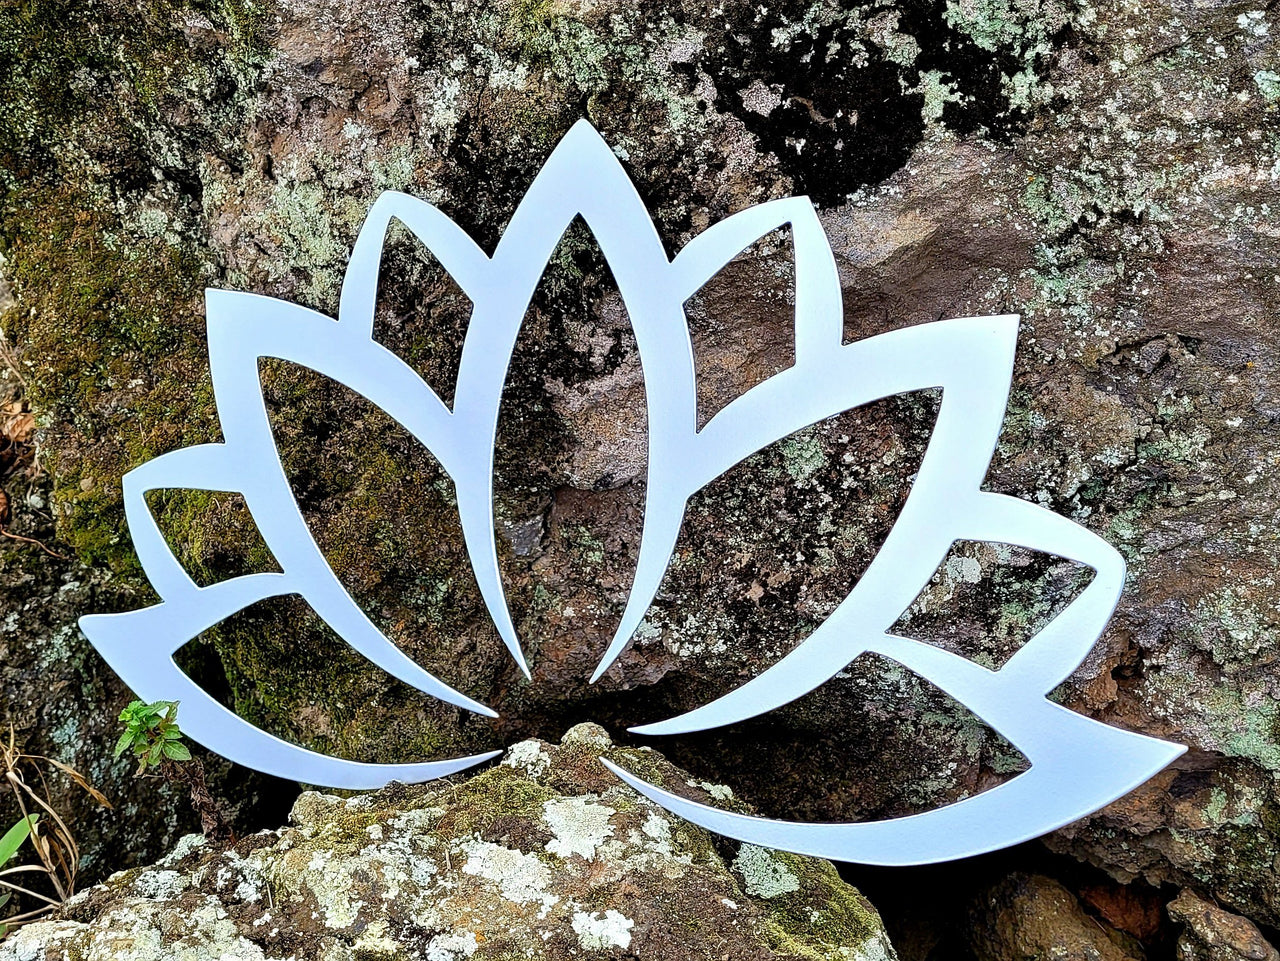 Silver metal lotus flower design sitting against a moss covered rock background.